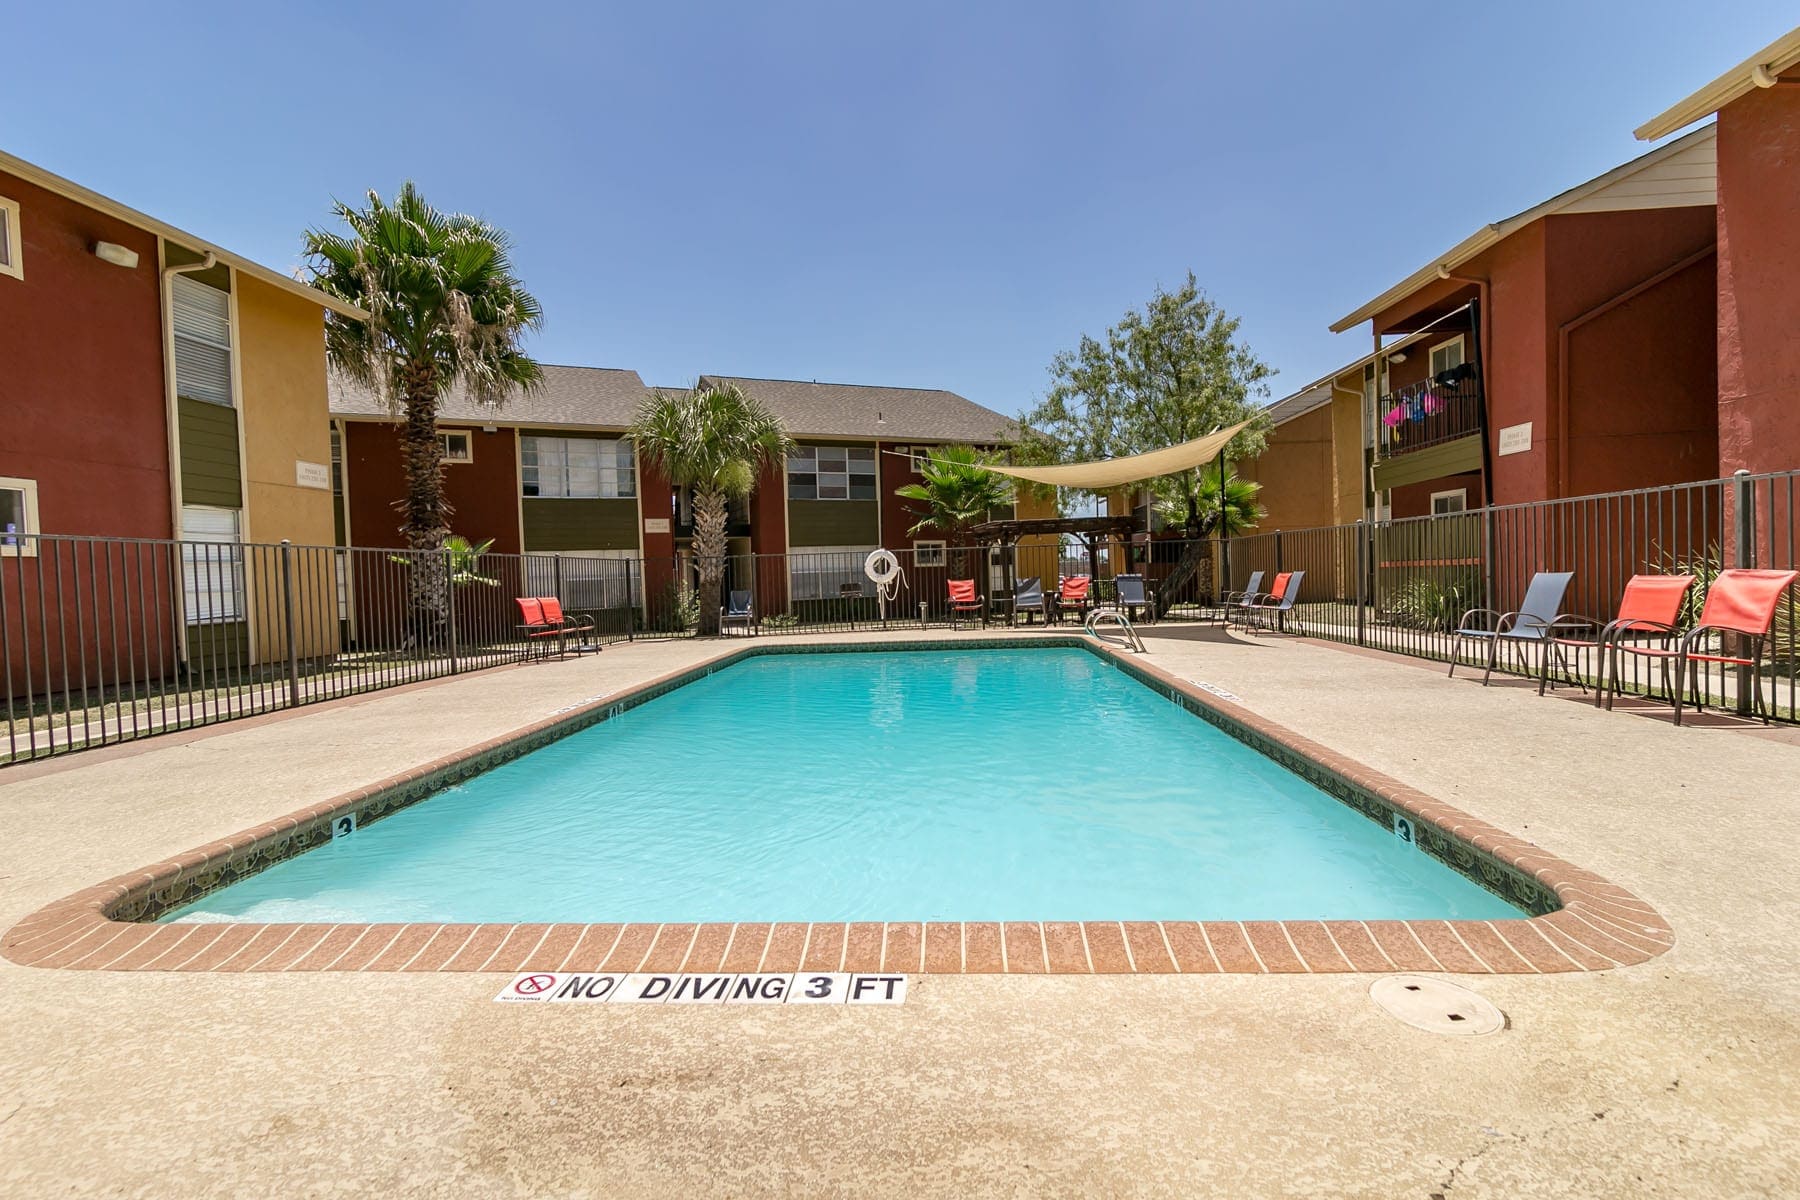 Apartments in San Antonio, TX - Fenced in Community Pool with Ample Seating and Shaded Area.